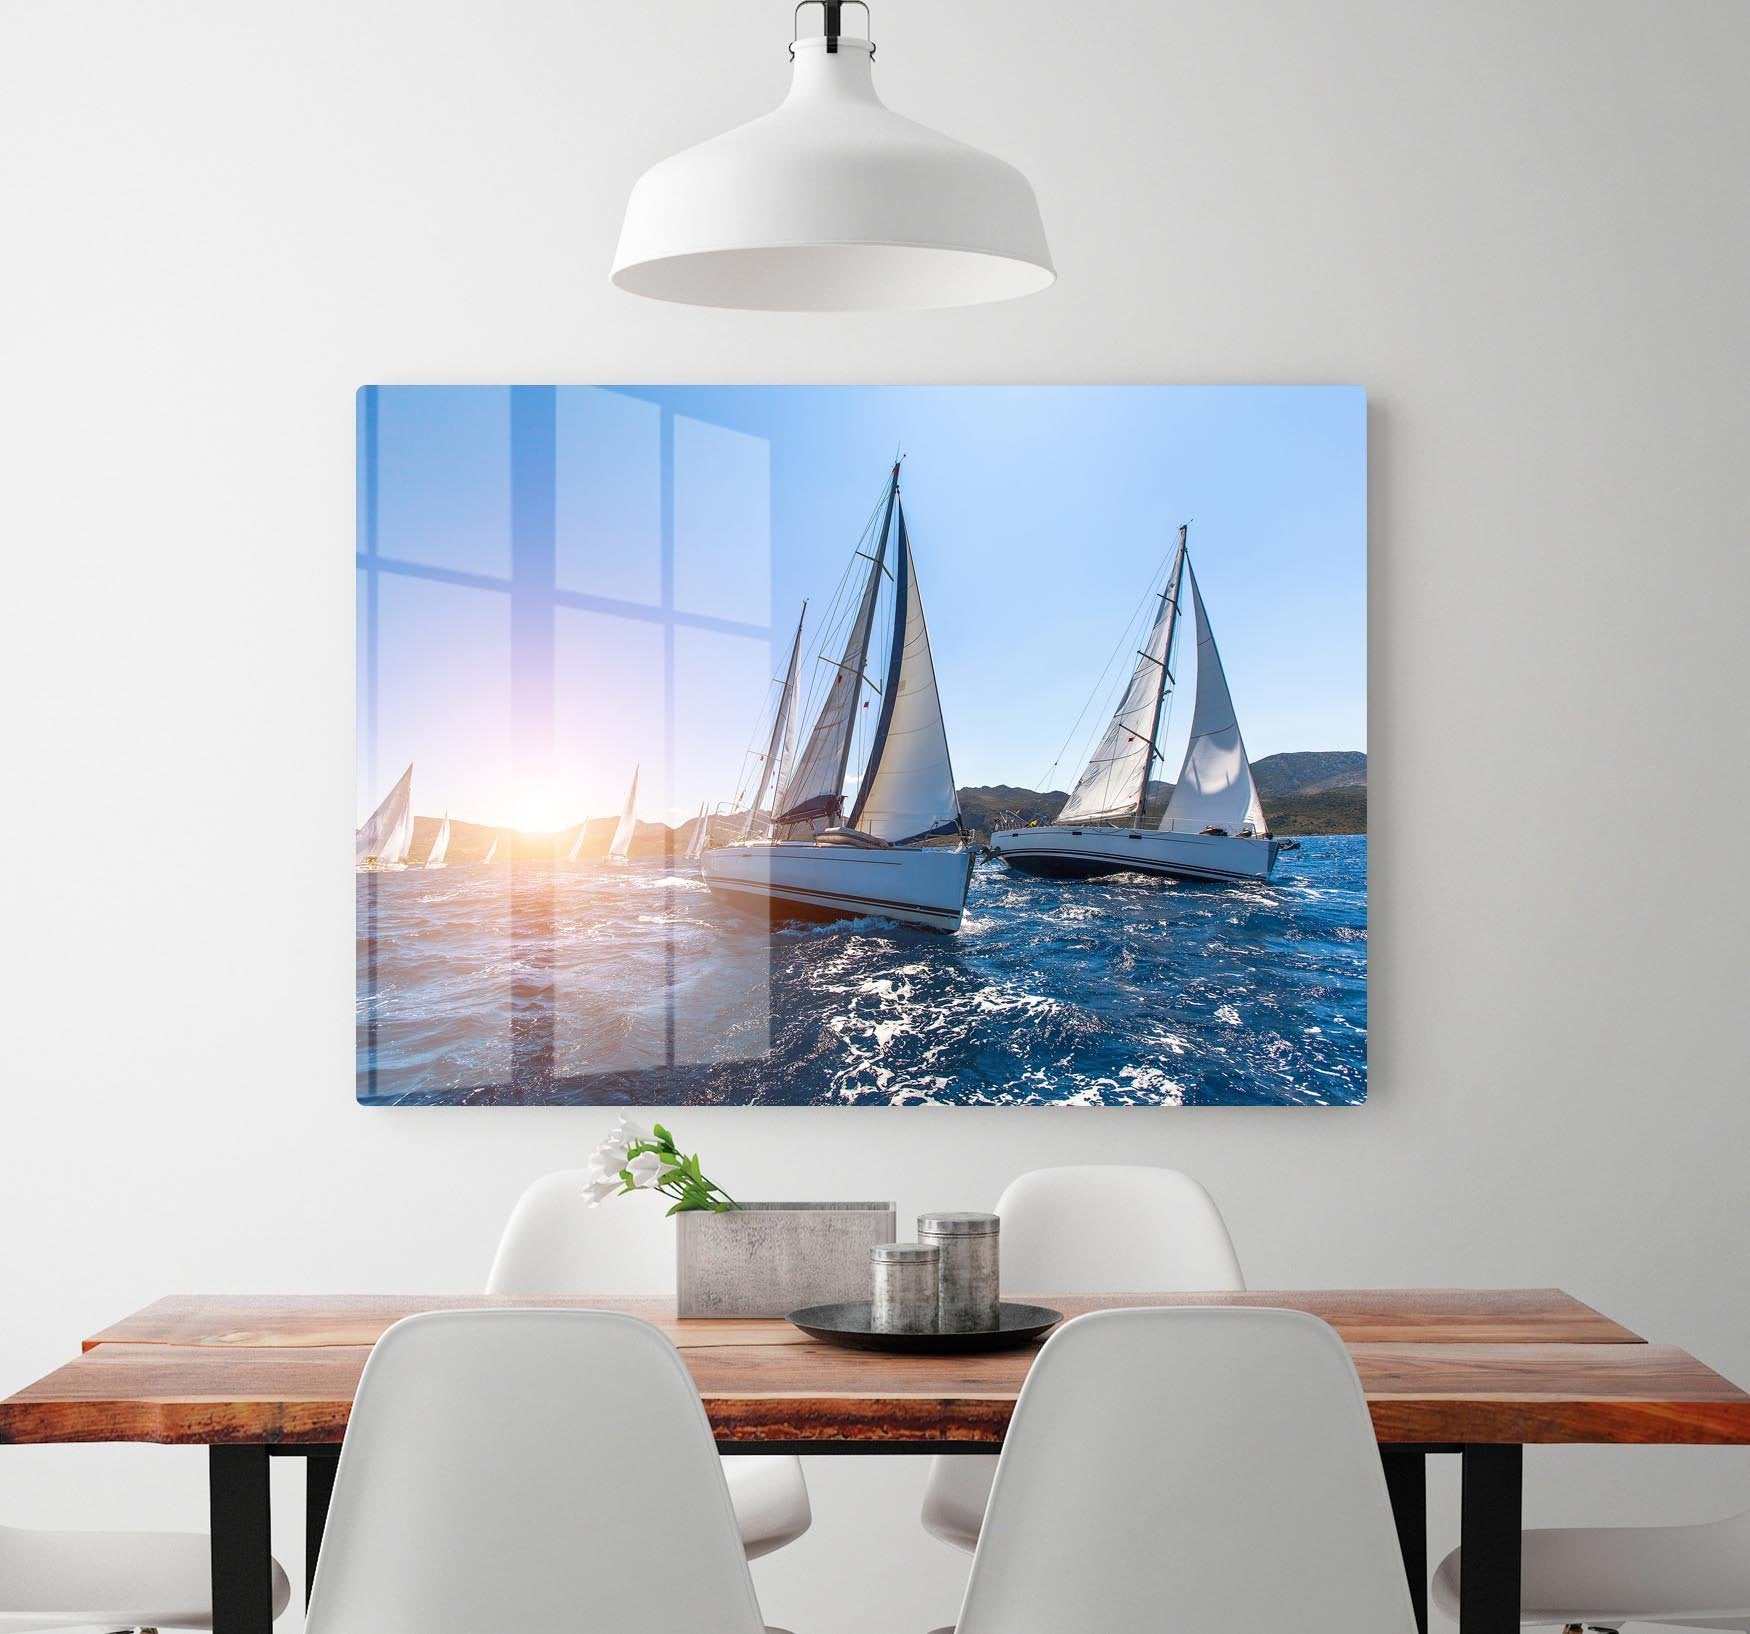 Sailing in the wind through the waves at the Sea HD Metal Print